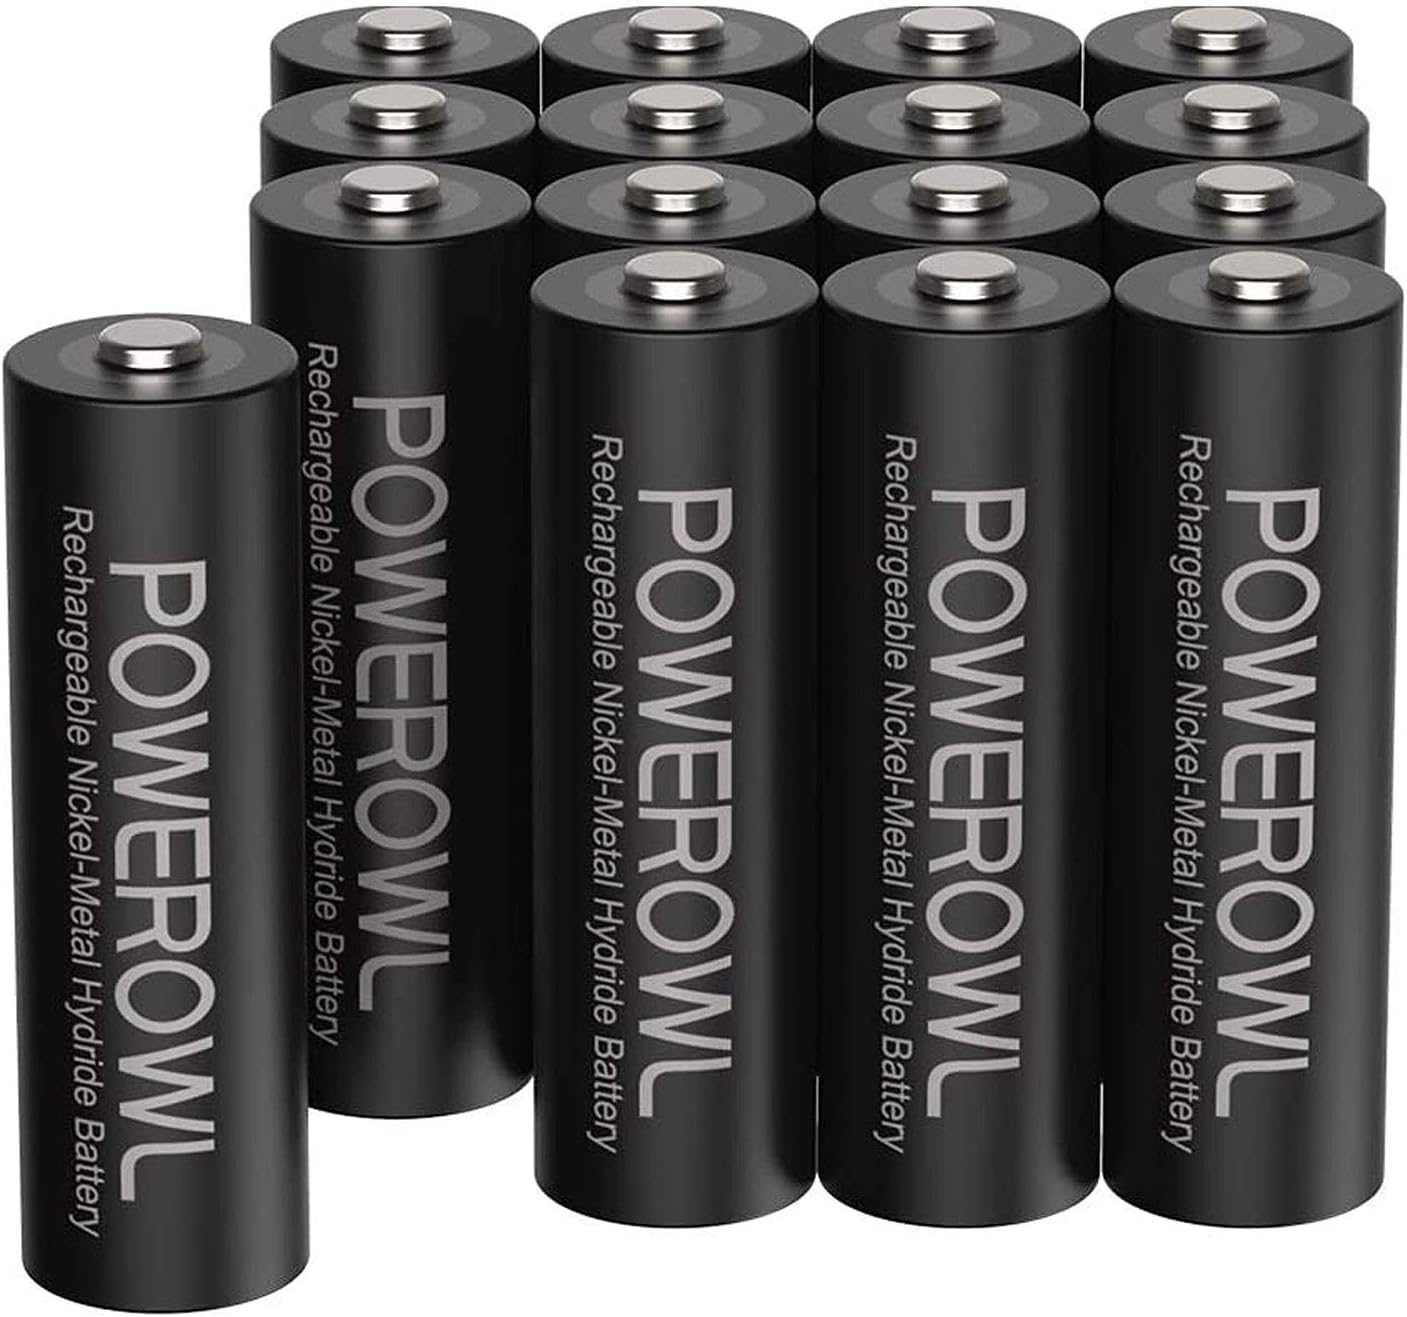 Read more about the article POWEROWL AA Rechargeable Batteries, 2800mAh High Capacity Batteries 1.2V NiMH Low Self Discharge, Pack of 16 for ONLY $22.79 (Was $29.99)